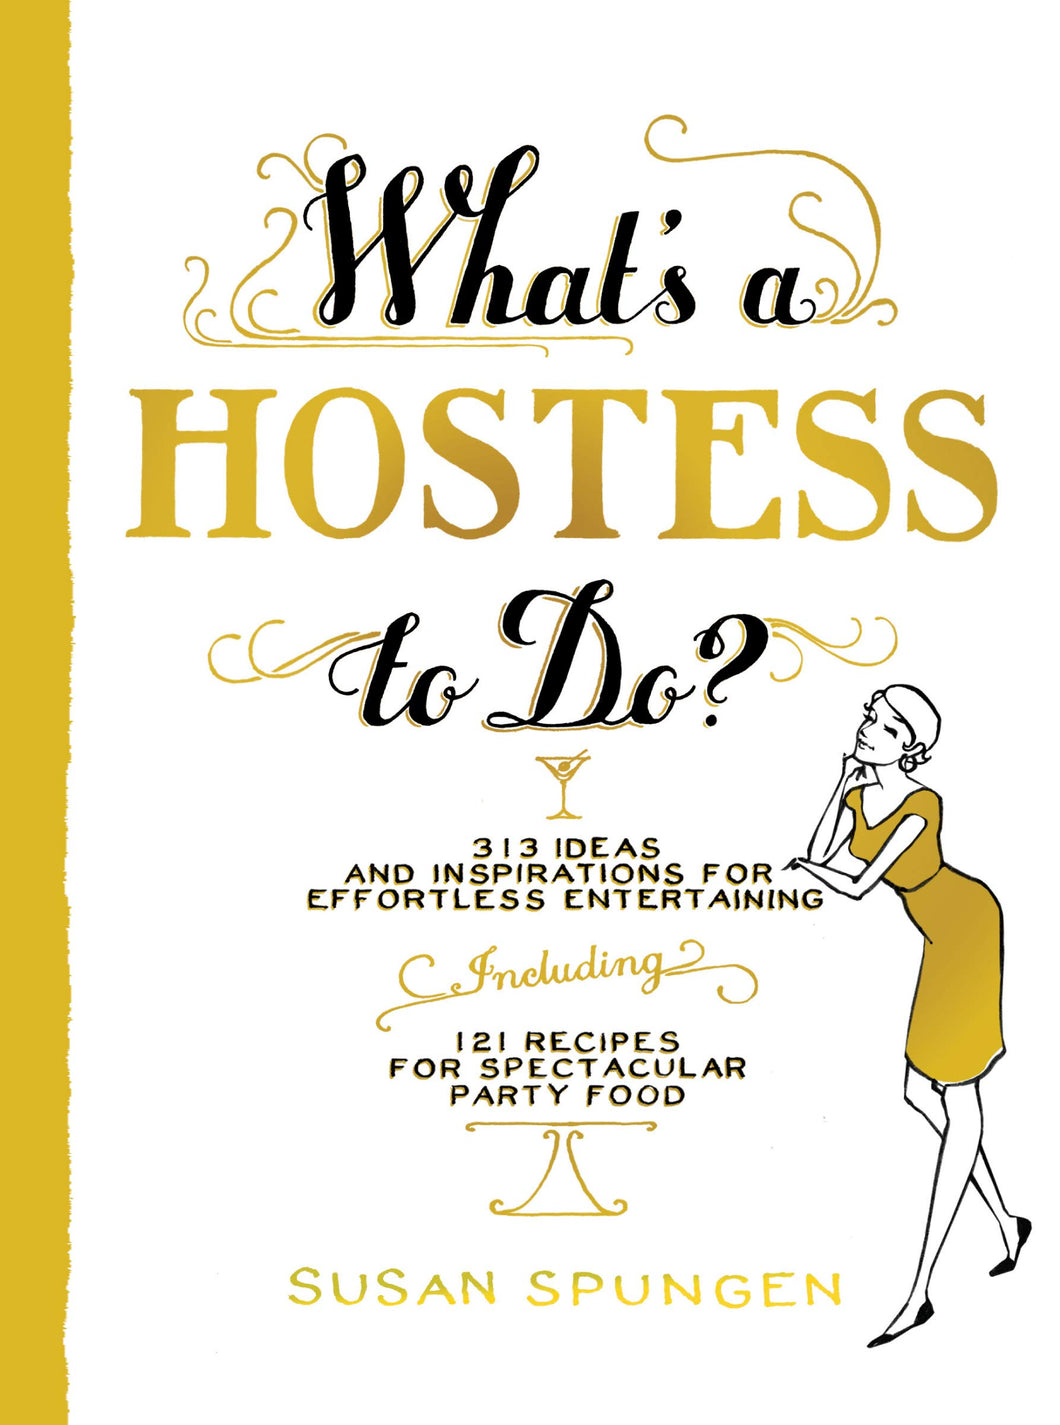 What's a Hostess to Do?